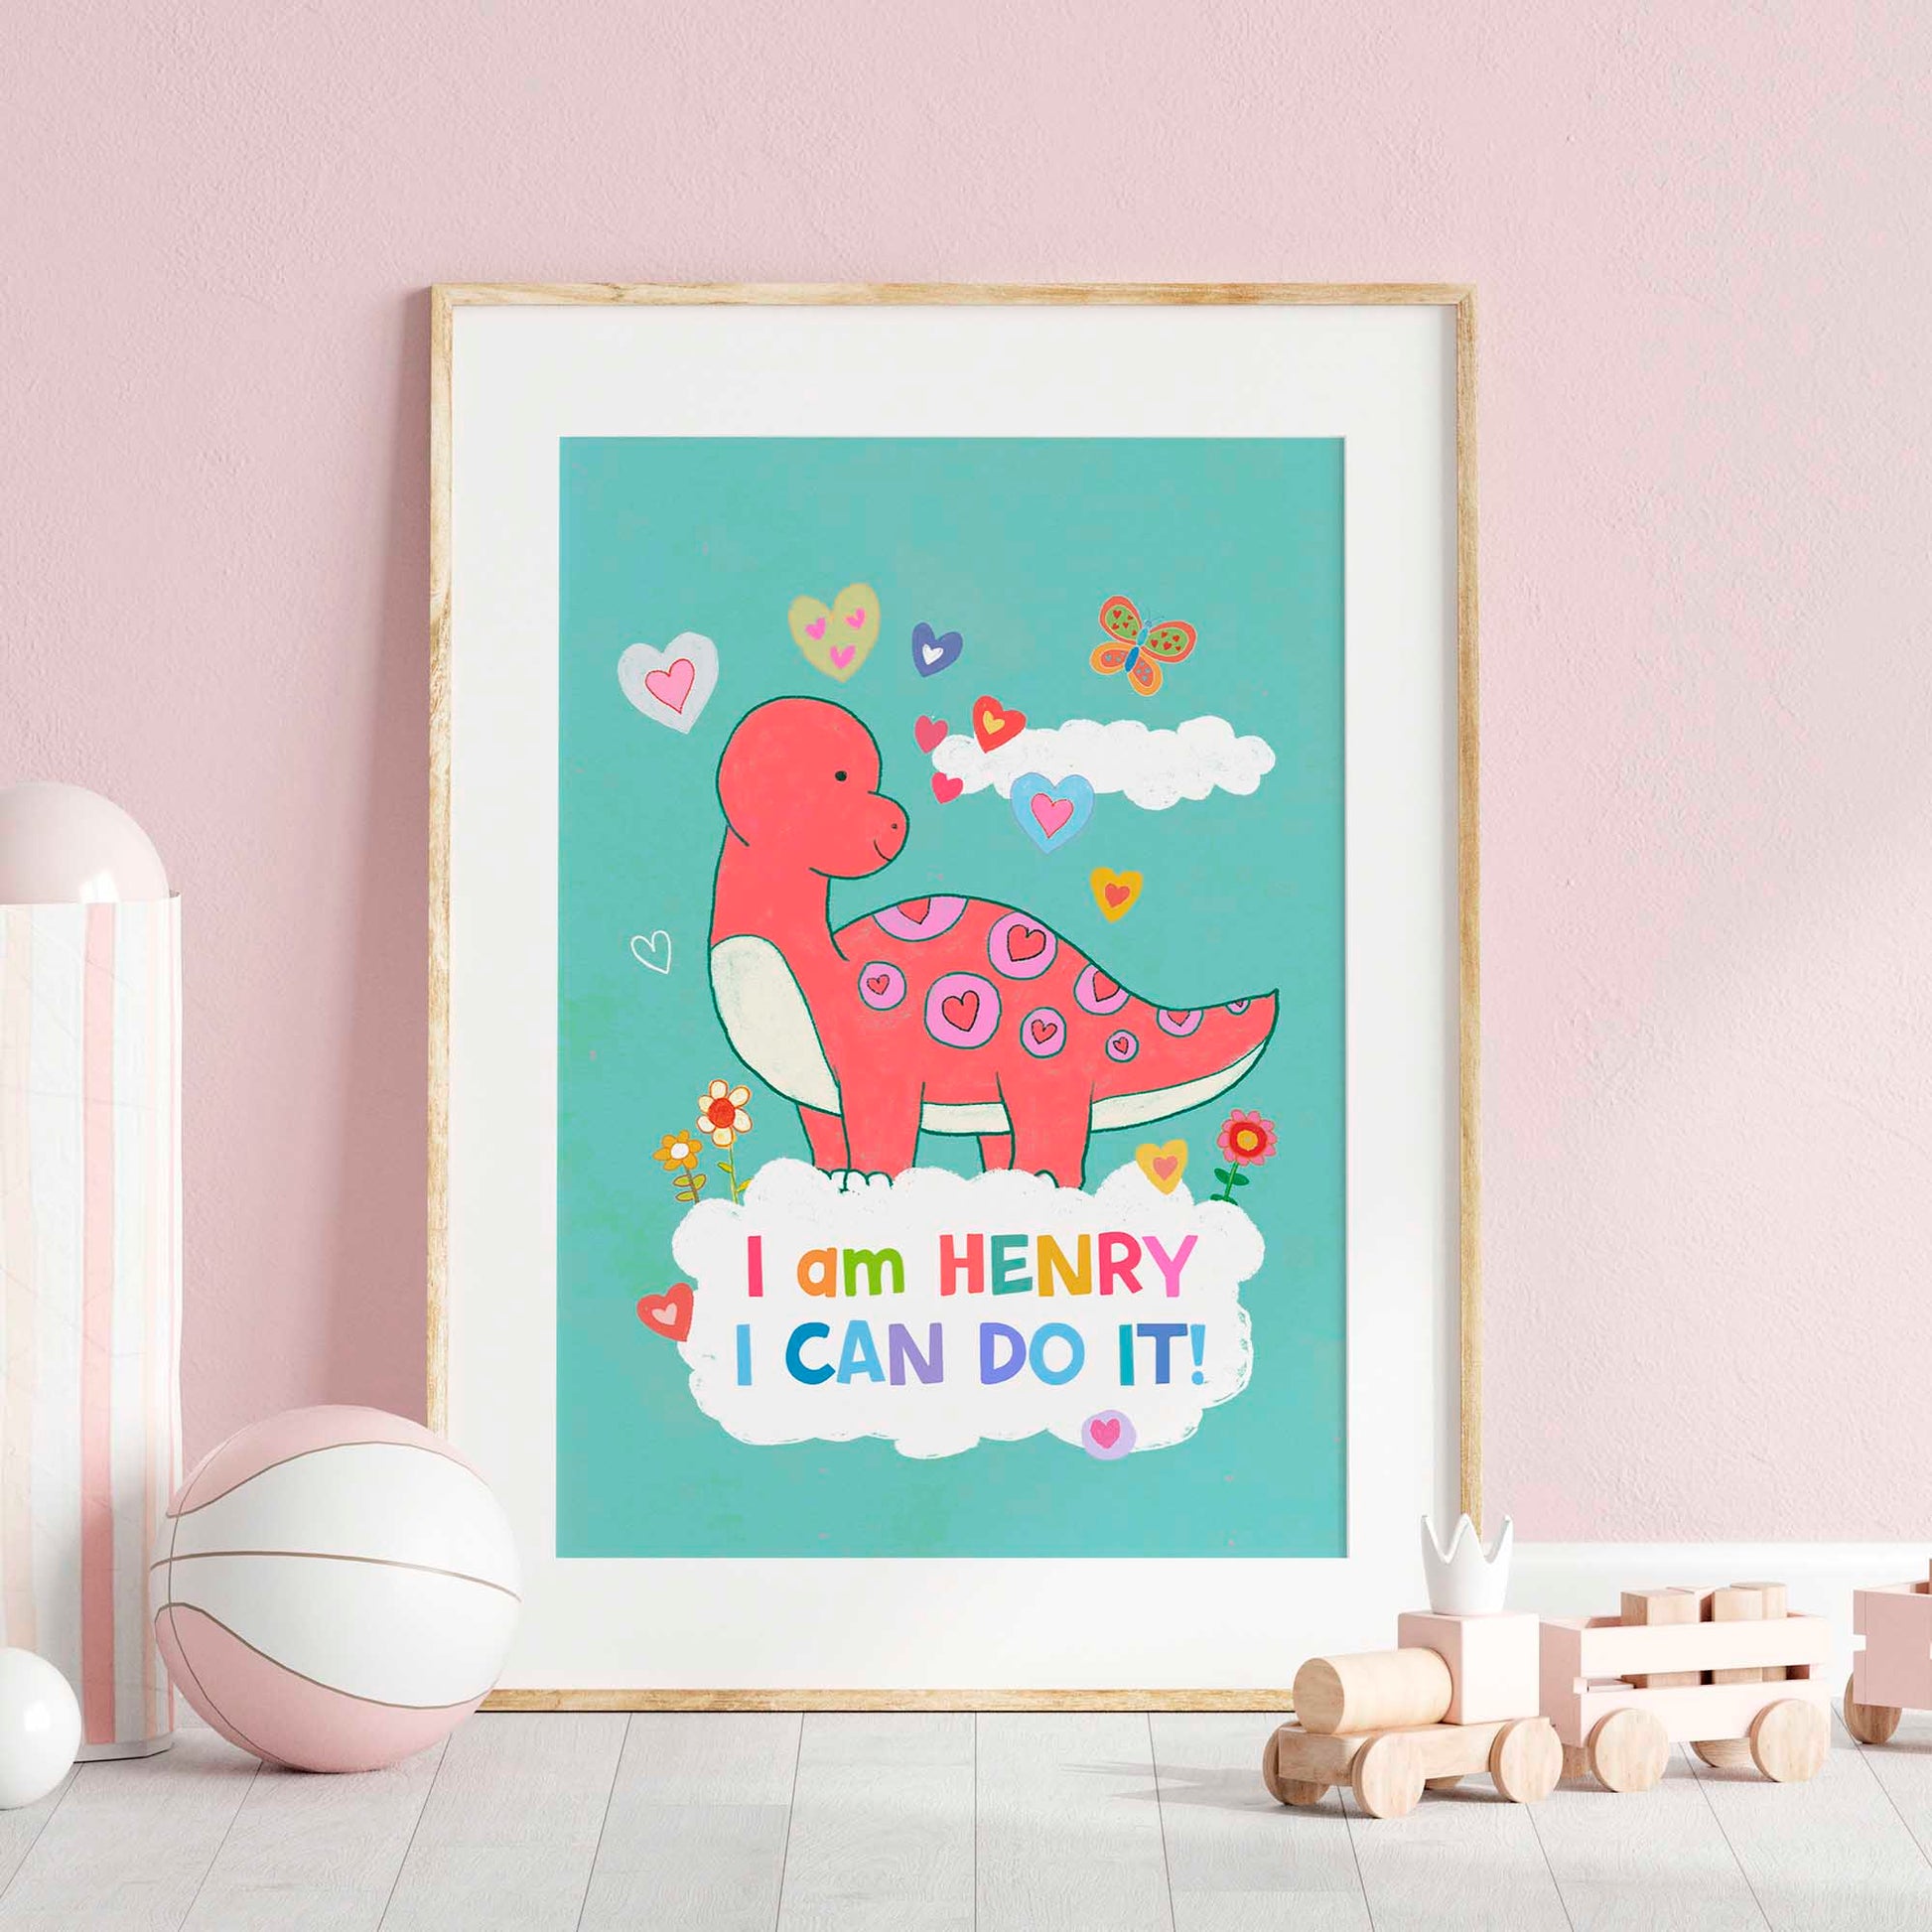 Colorful dinosaur illustration for kids, a vibrant addition to nursery decor with inspiring affirmations.